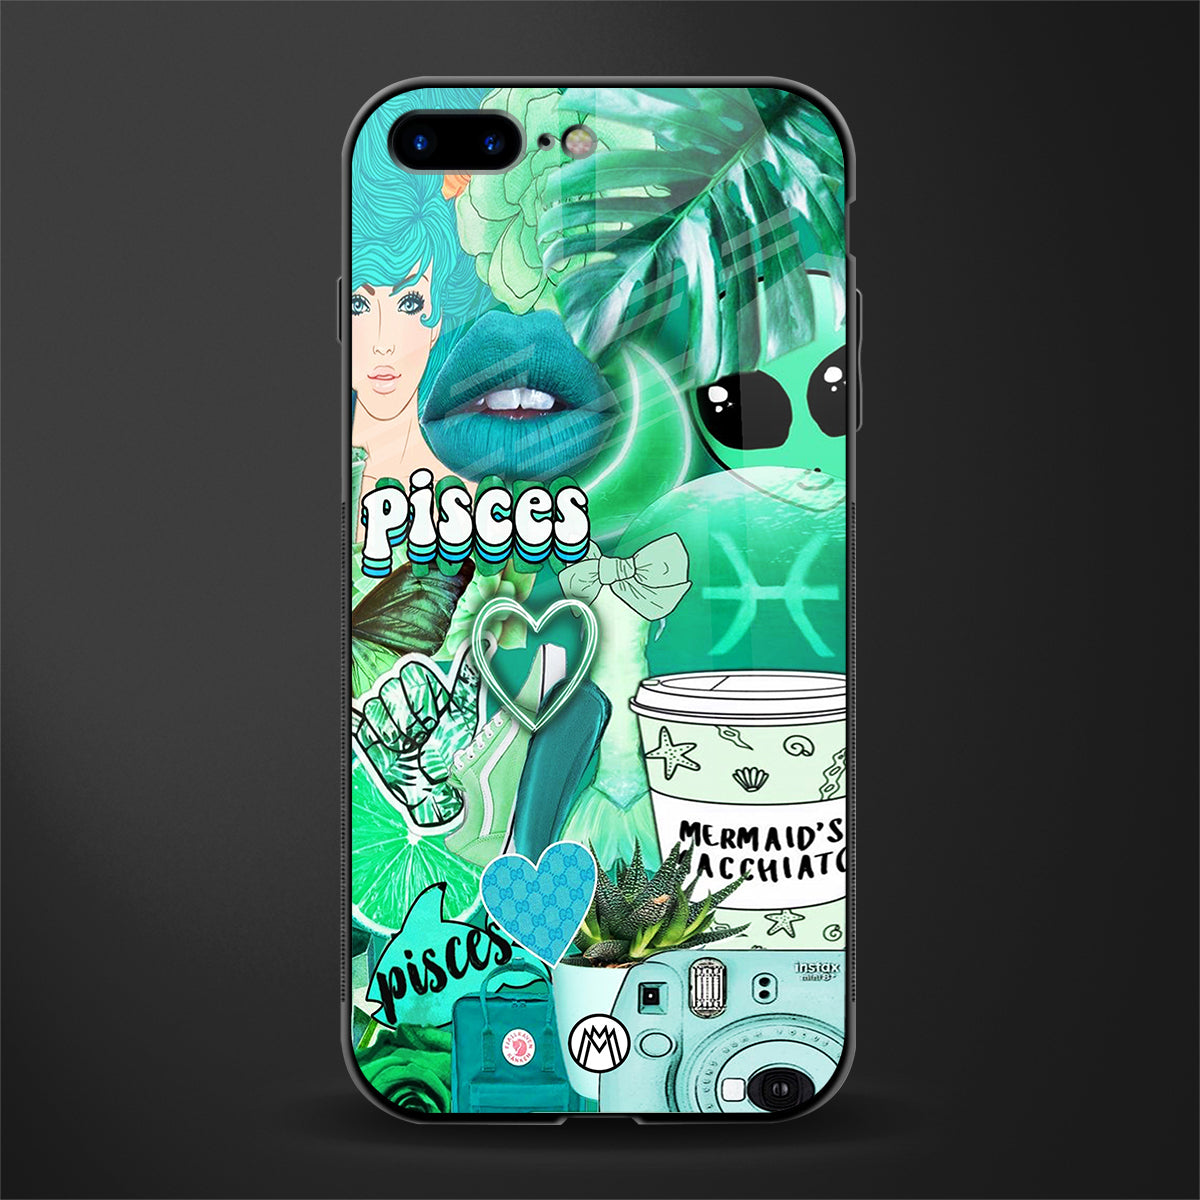 pisces aesthetic collage glass case for iphone 8 plus image